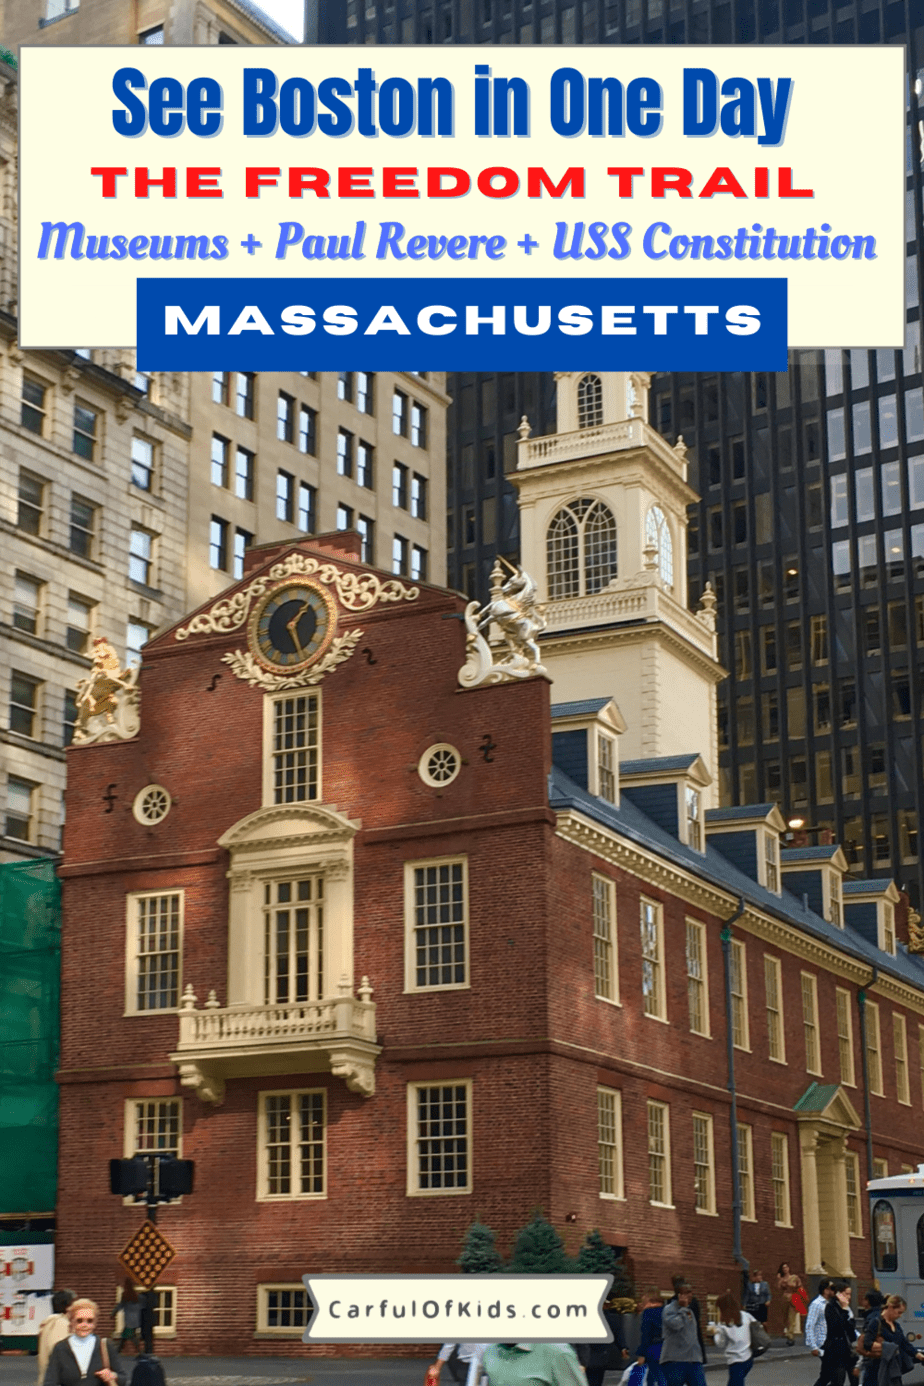 Grab the kids and find the Red Line for a day of fun along Boston's Freedom Trail. Stop by the top 16 spots that lead to the American Revolution and discover a few Boston icons as well. Find cheap eats for the kids in this One Day Itinerary for Boston. One Day Itinerary in Boston | National Park sites in Boston | What to do in Boston with Kids | The Freedom Trail in One Day | What to see in Boston with kids #Boston